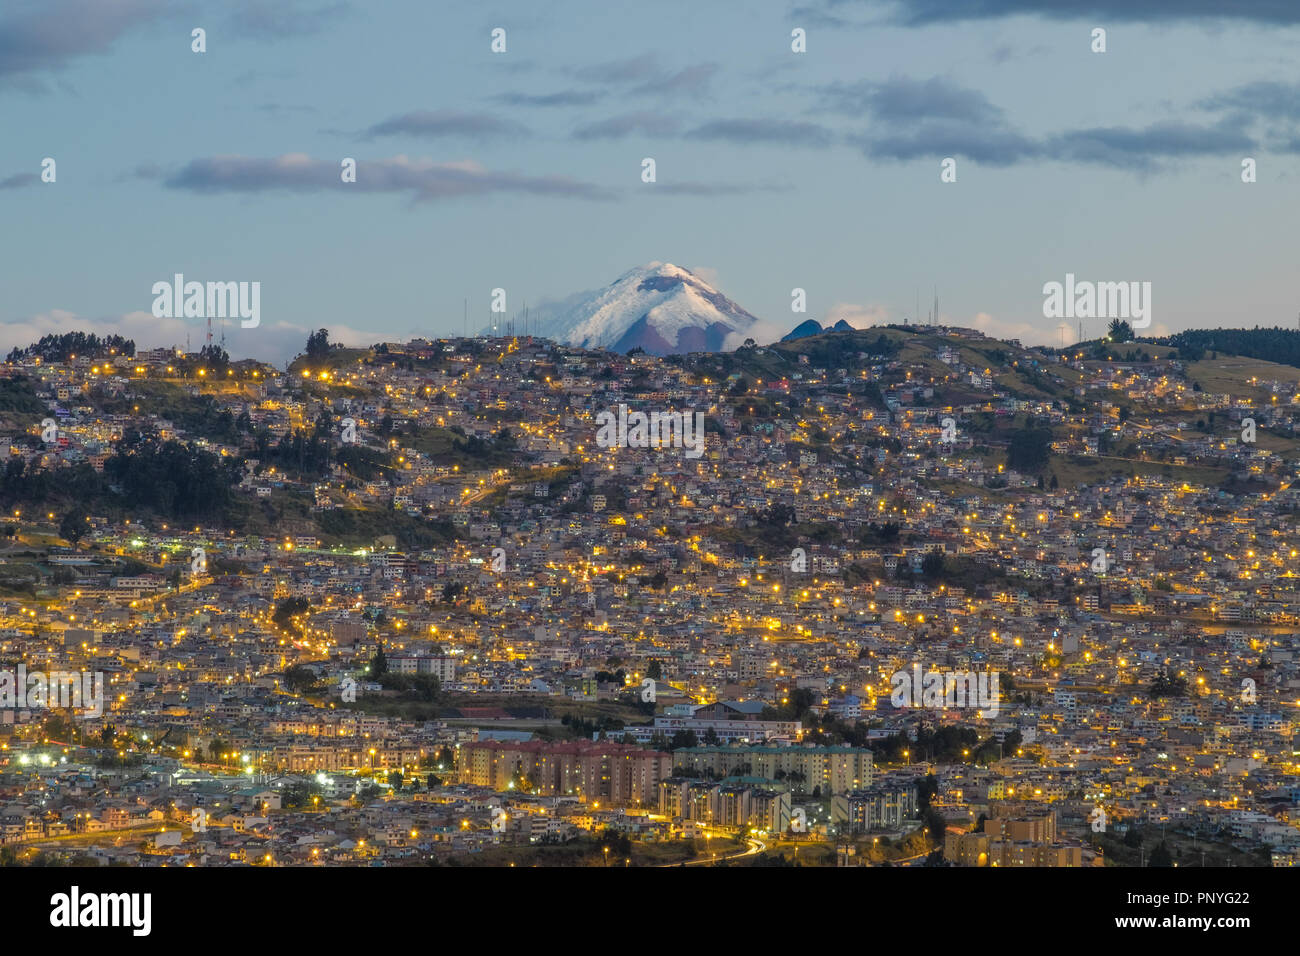 View of Quito at night and Cotopaxi volcano in the background, Ecuador Stock Photo